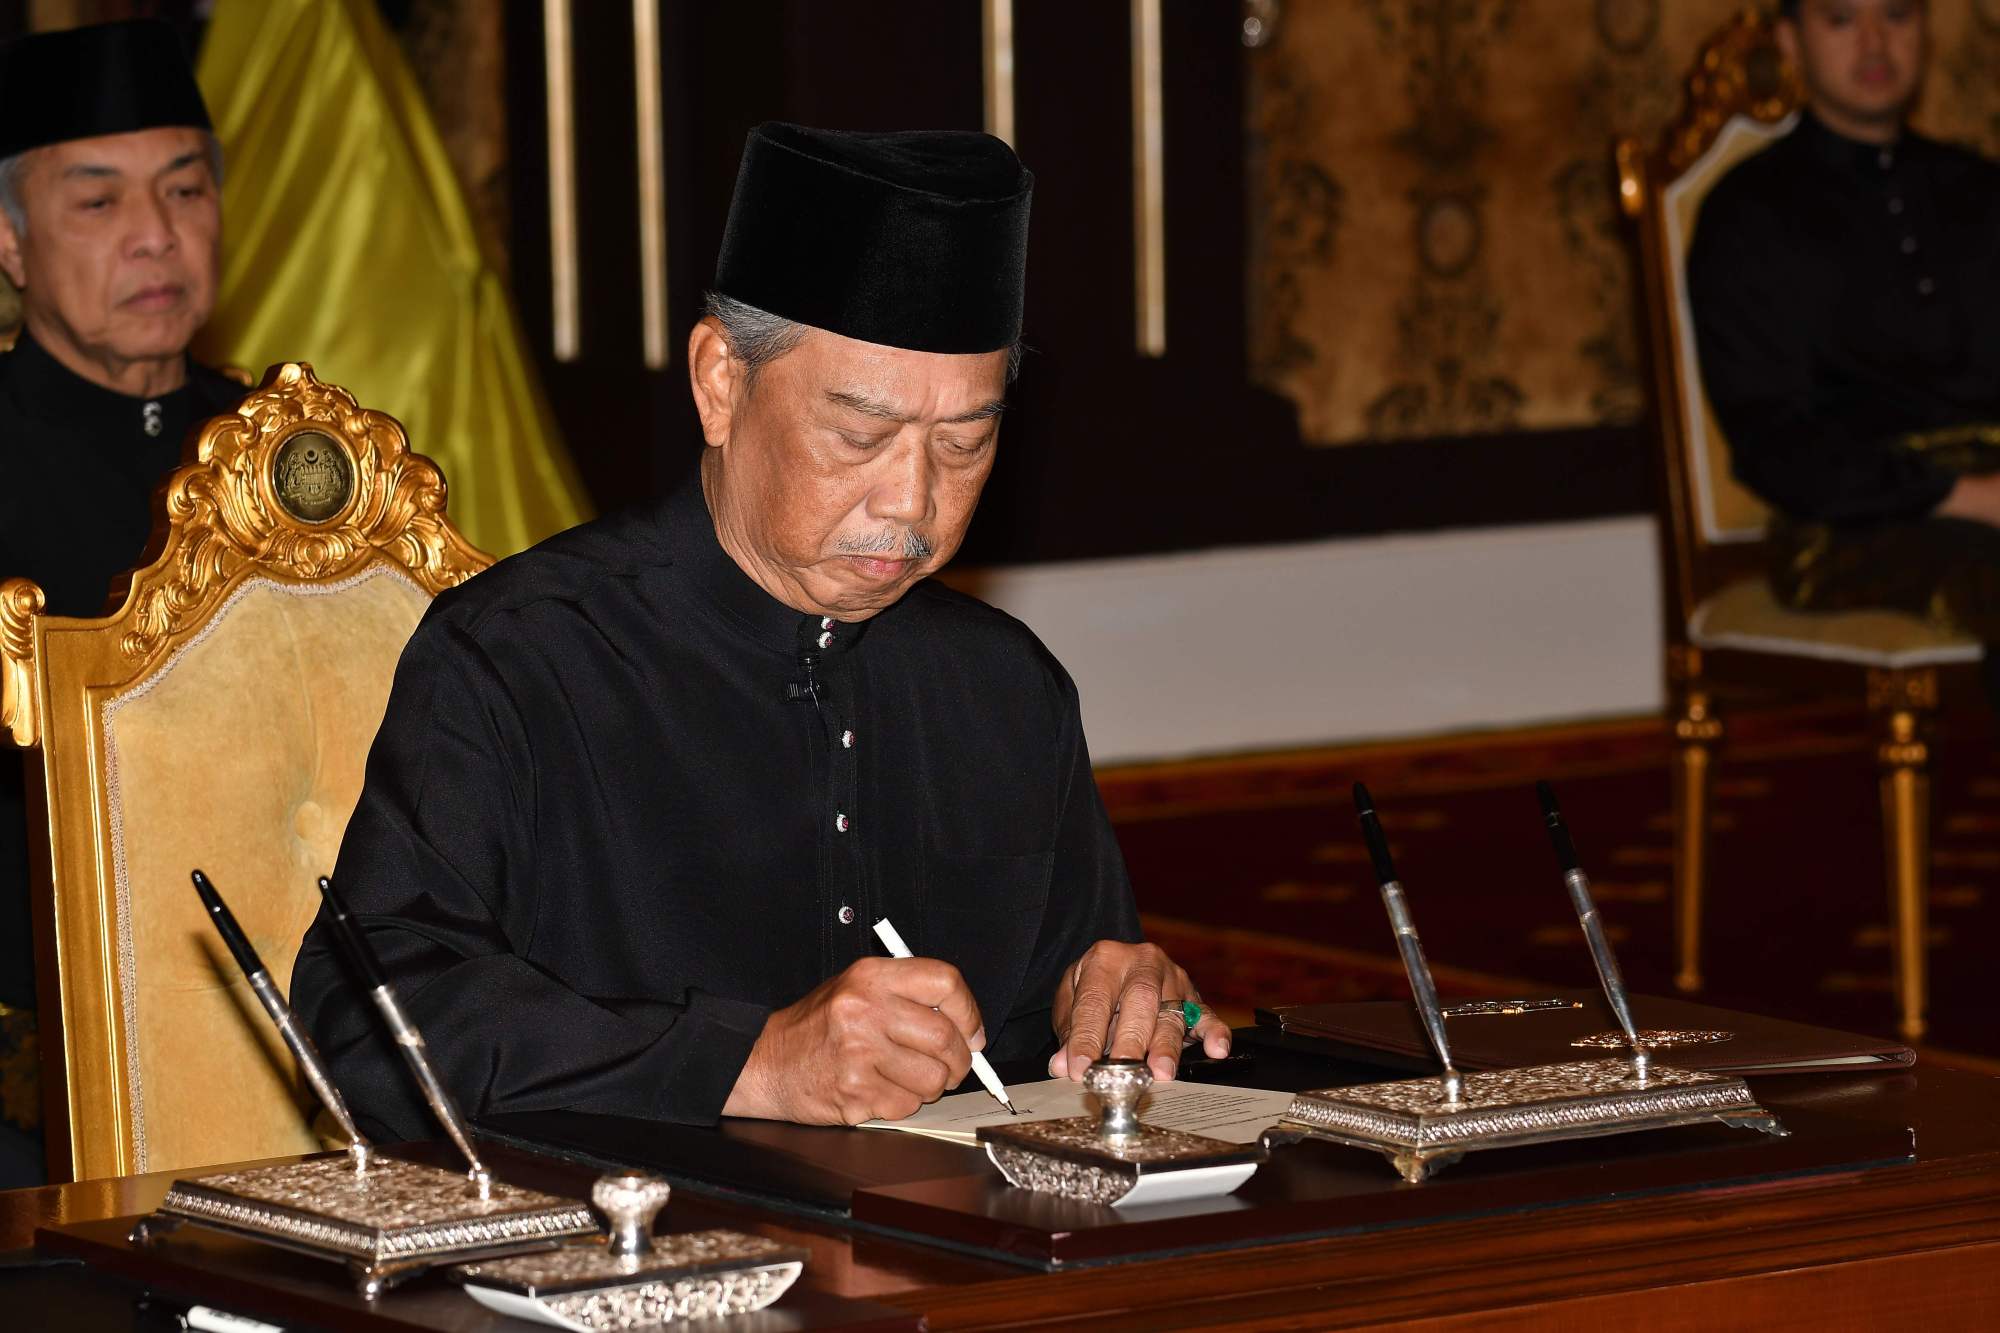 Malaysian Prime Minister Muhyiddin Yassin signs documents after taking the oath as the country's new leader at the National Palace in Kuala Lumpur on Sunday. | AFP-JIJI